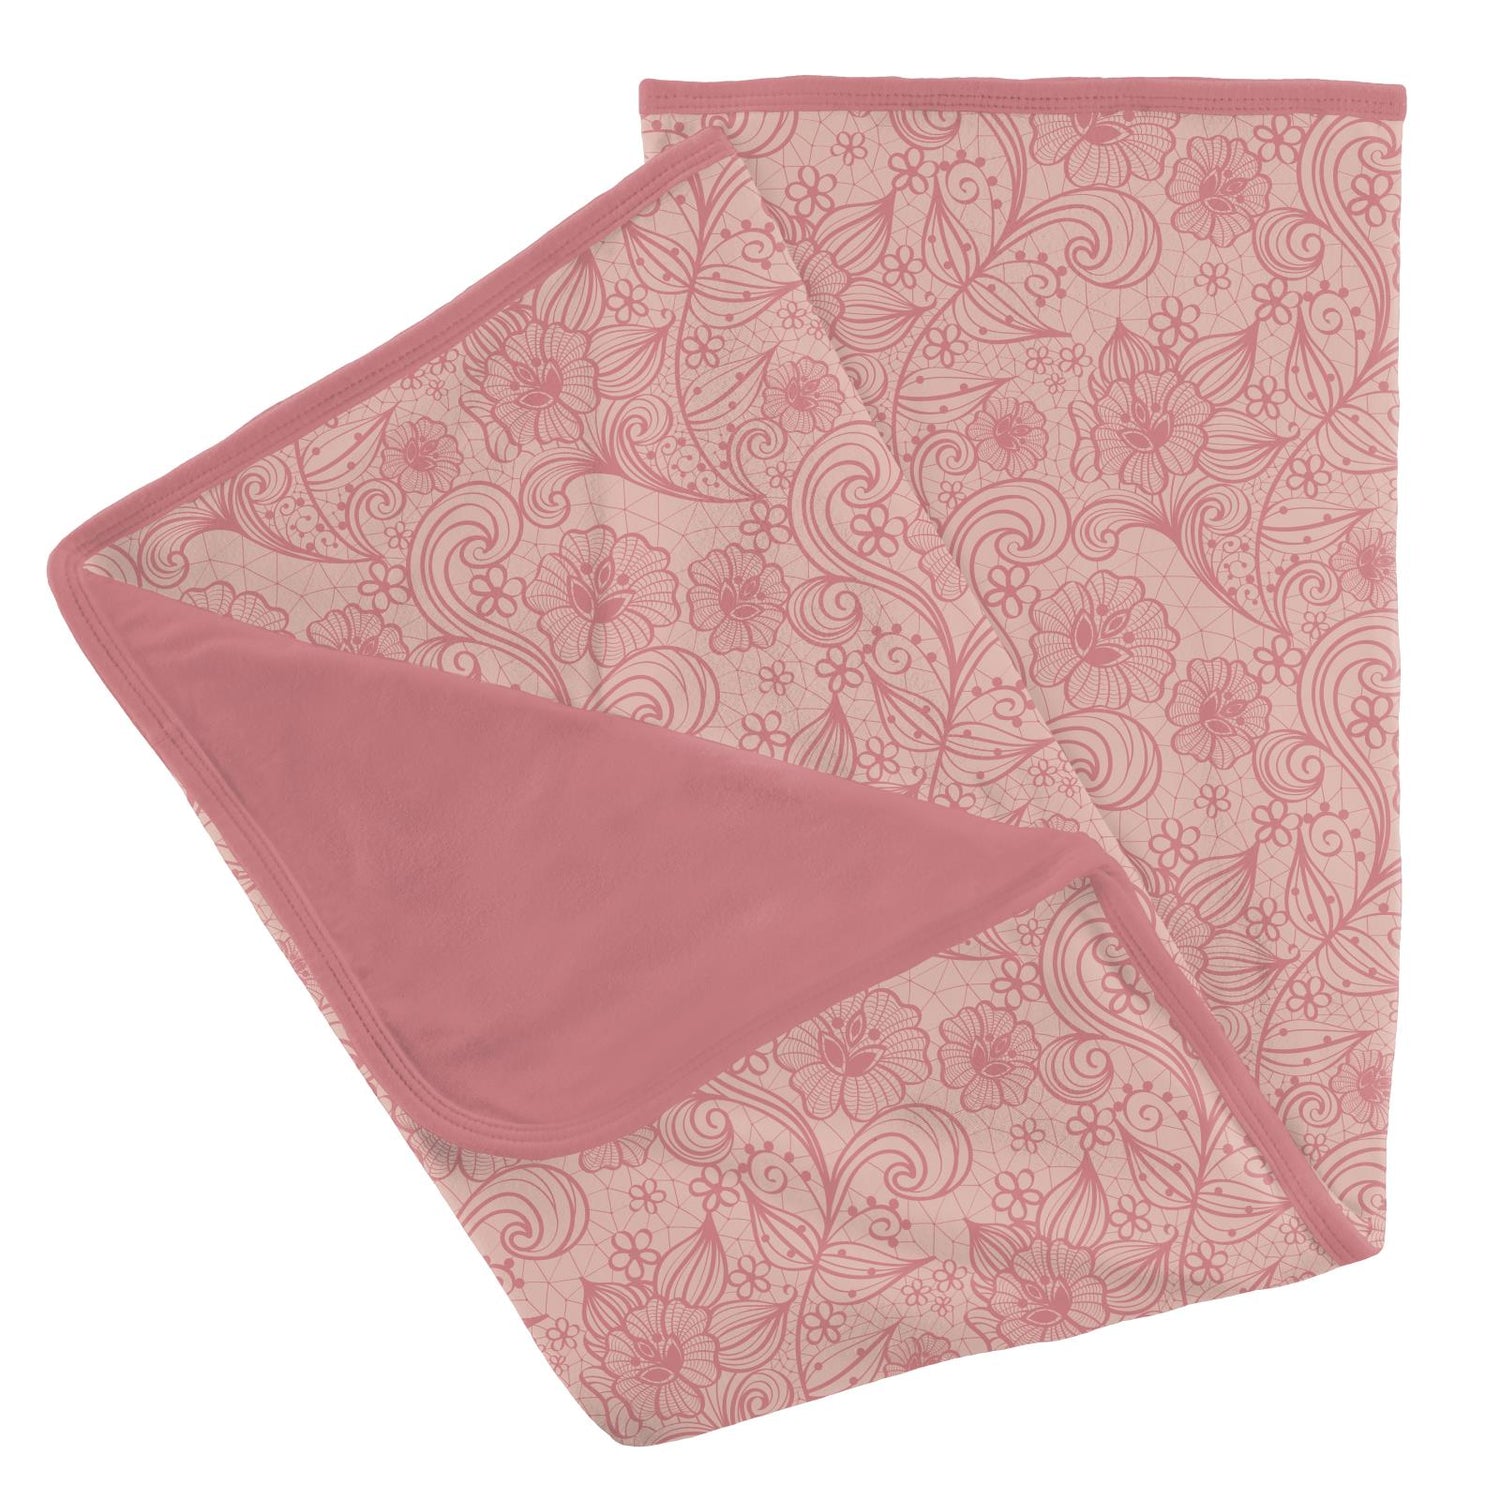 Print Stroller Blanket in Peach Blossom Lace